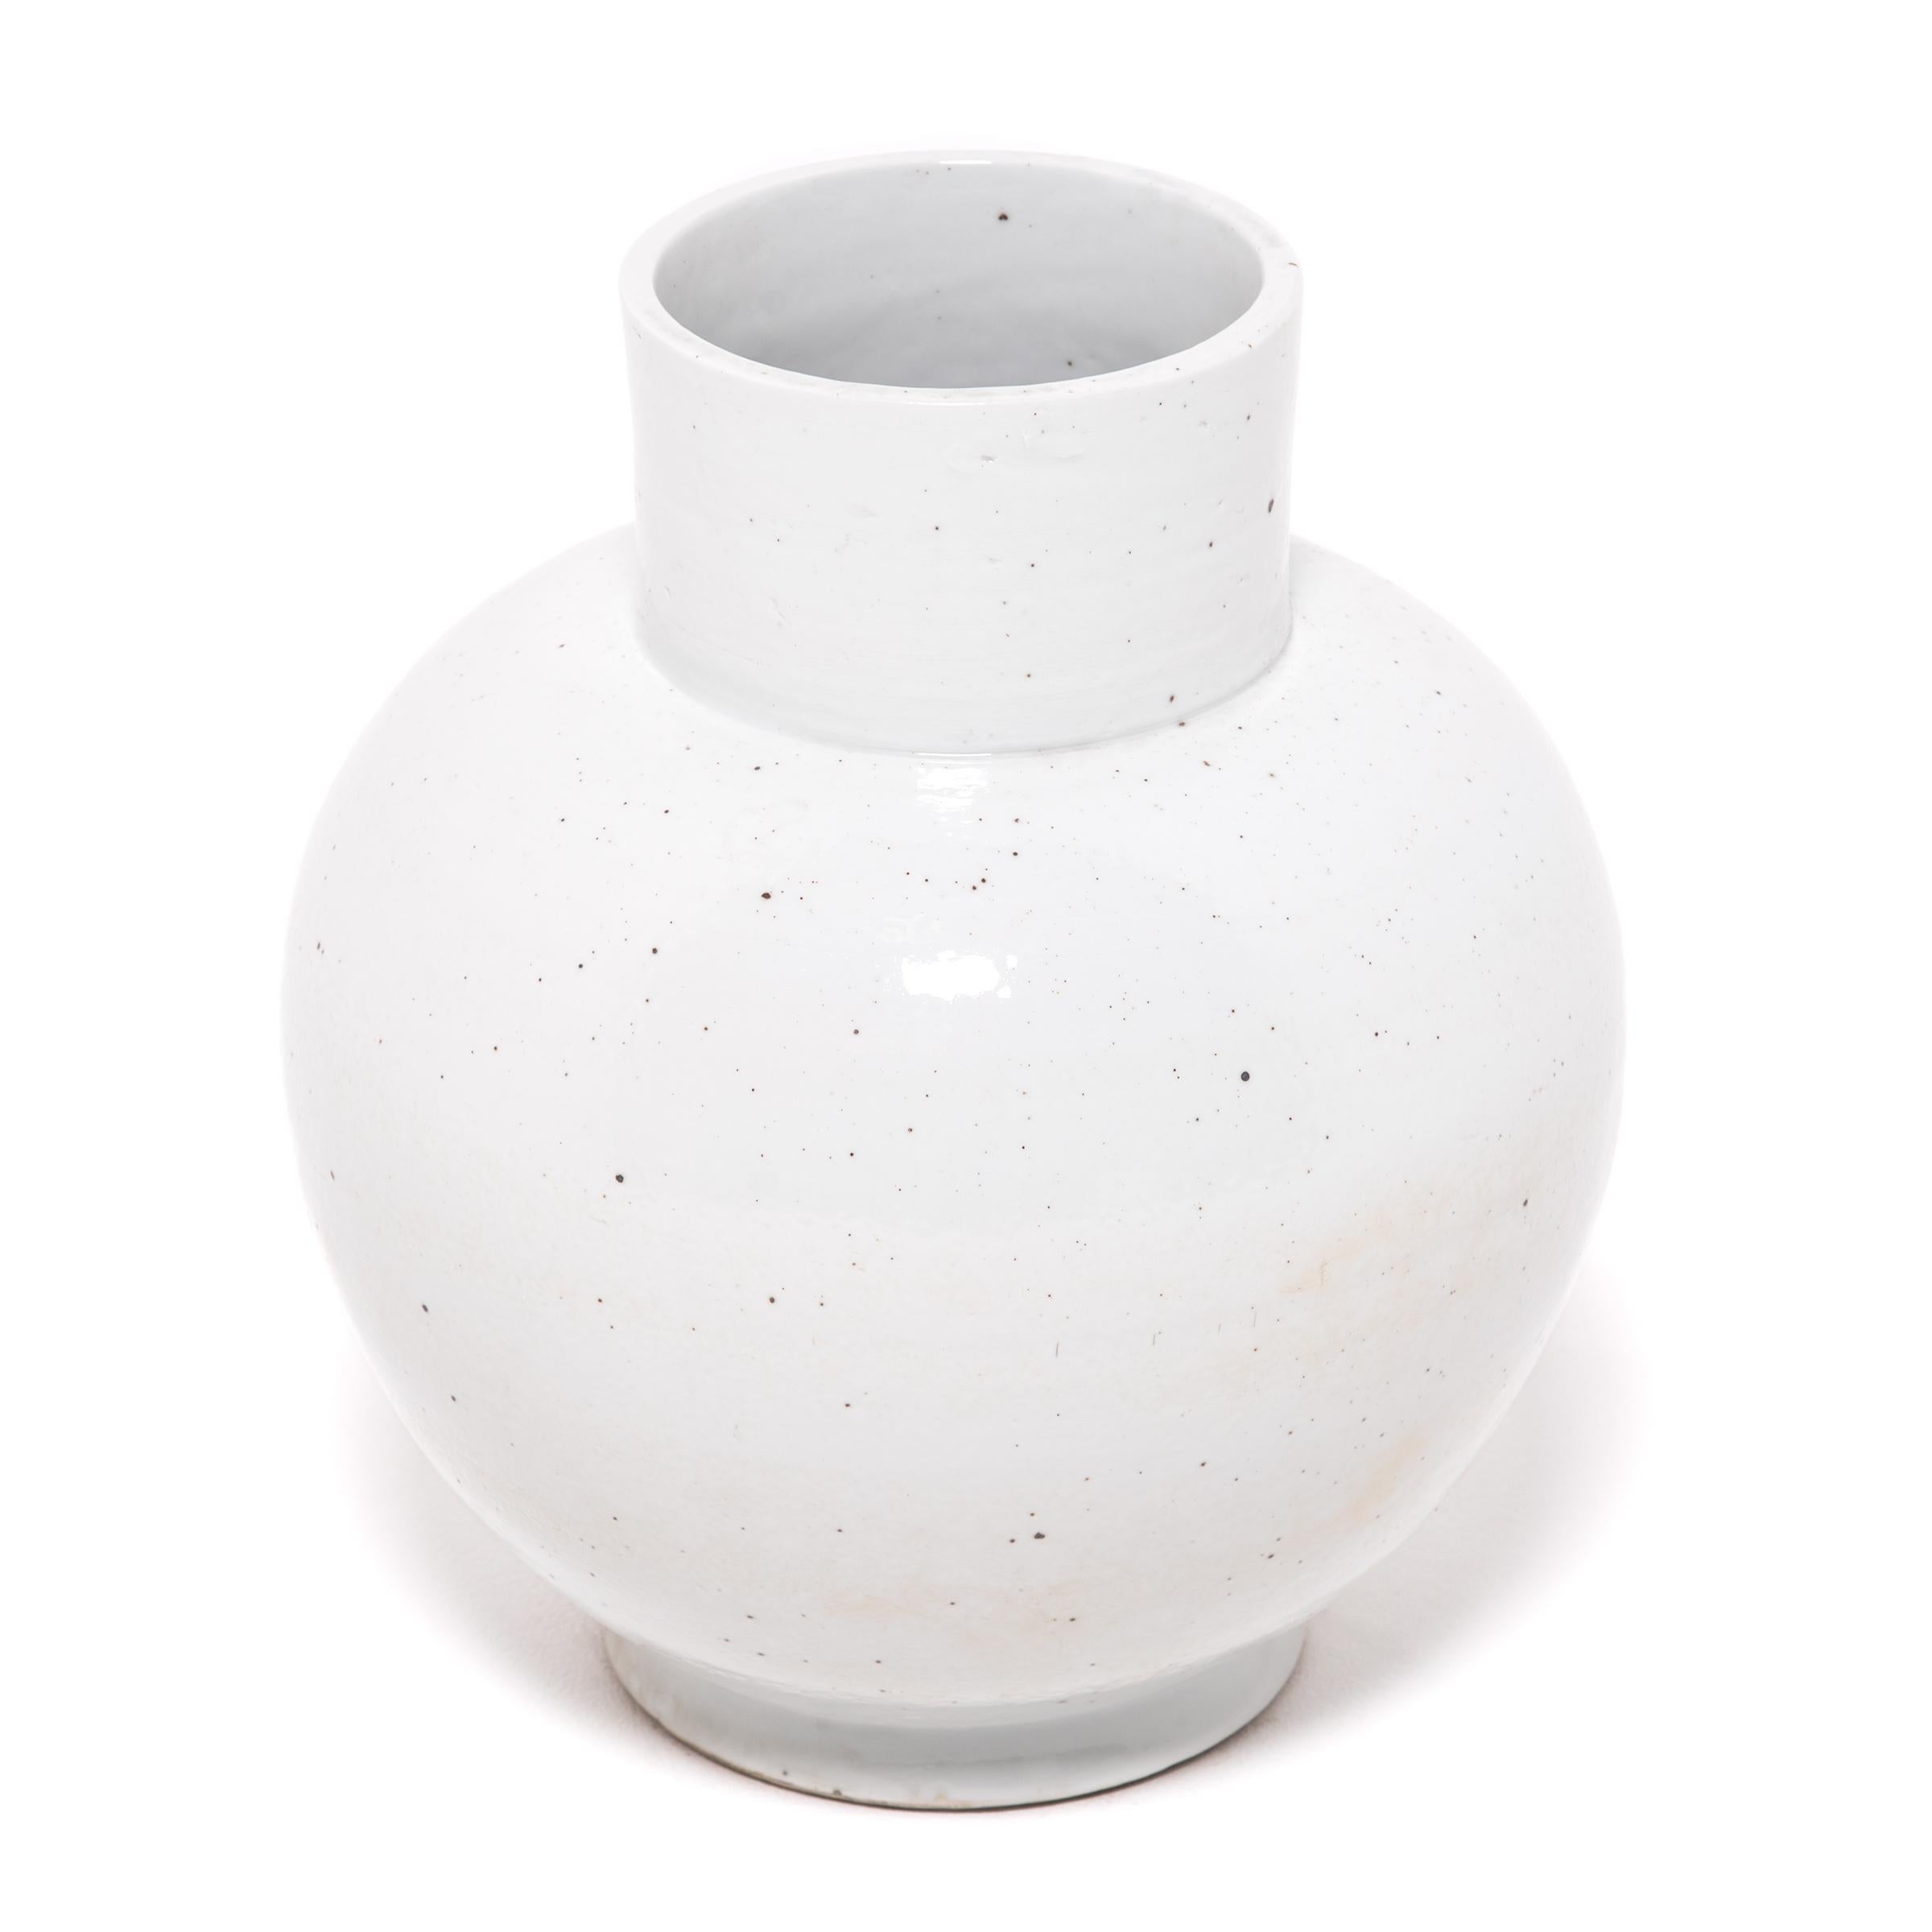 Drawing on a long Chinese tradition of monochrome ceramics, this striking short-necked vase is cloaked in an all-over milky white glaze. Sculpted by artisans in China's historic Jiangxi province, the rounded vase reinterprets a traditional